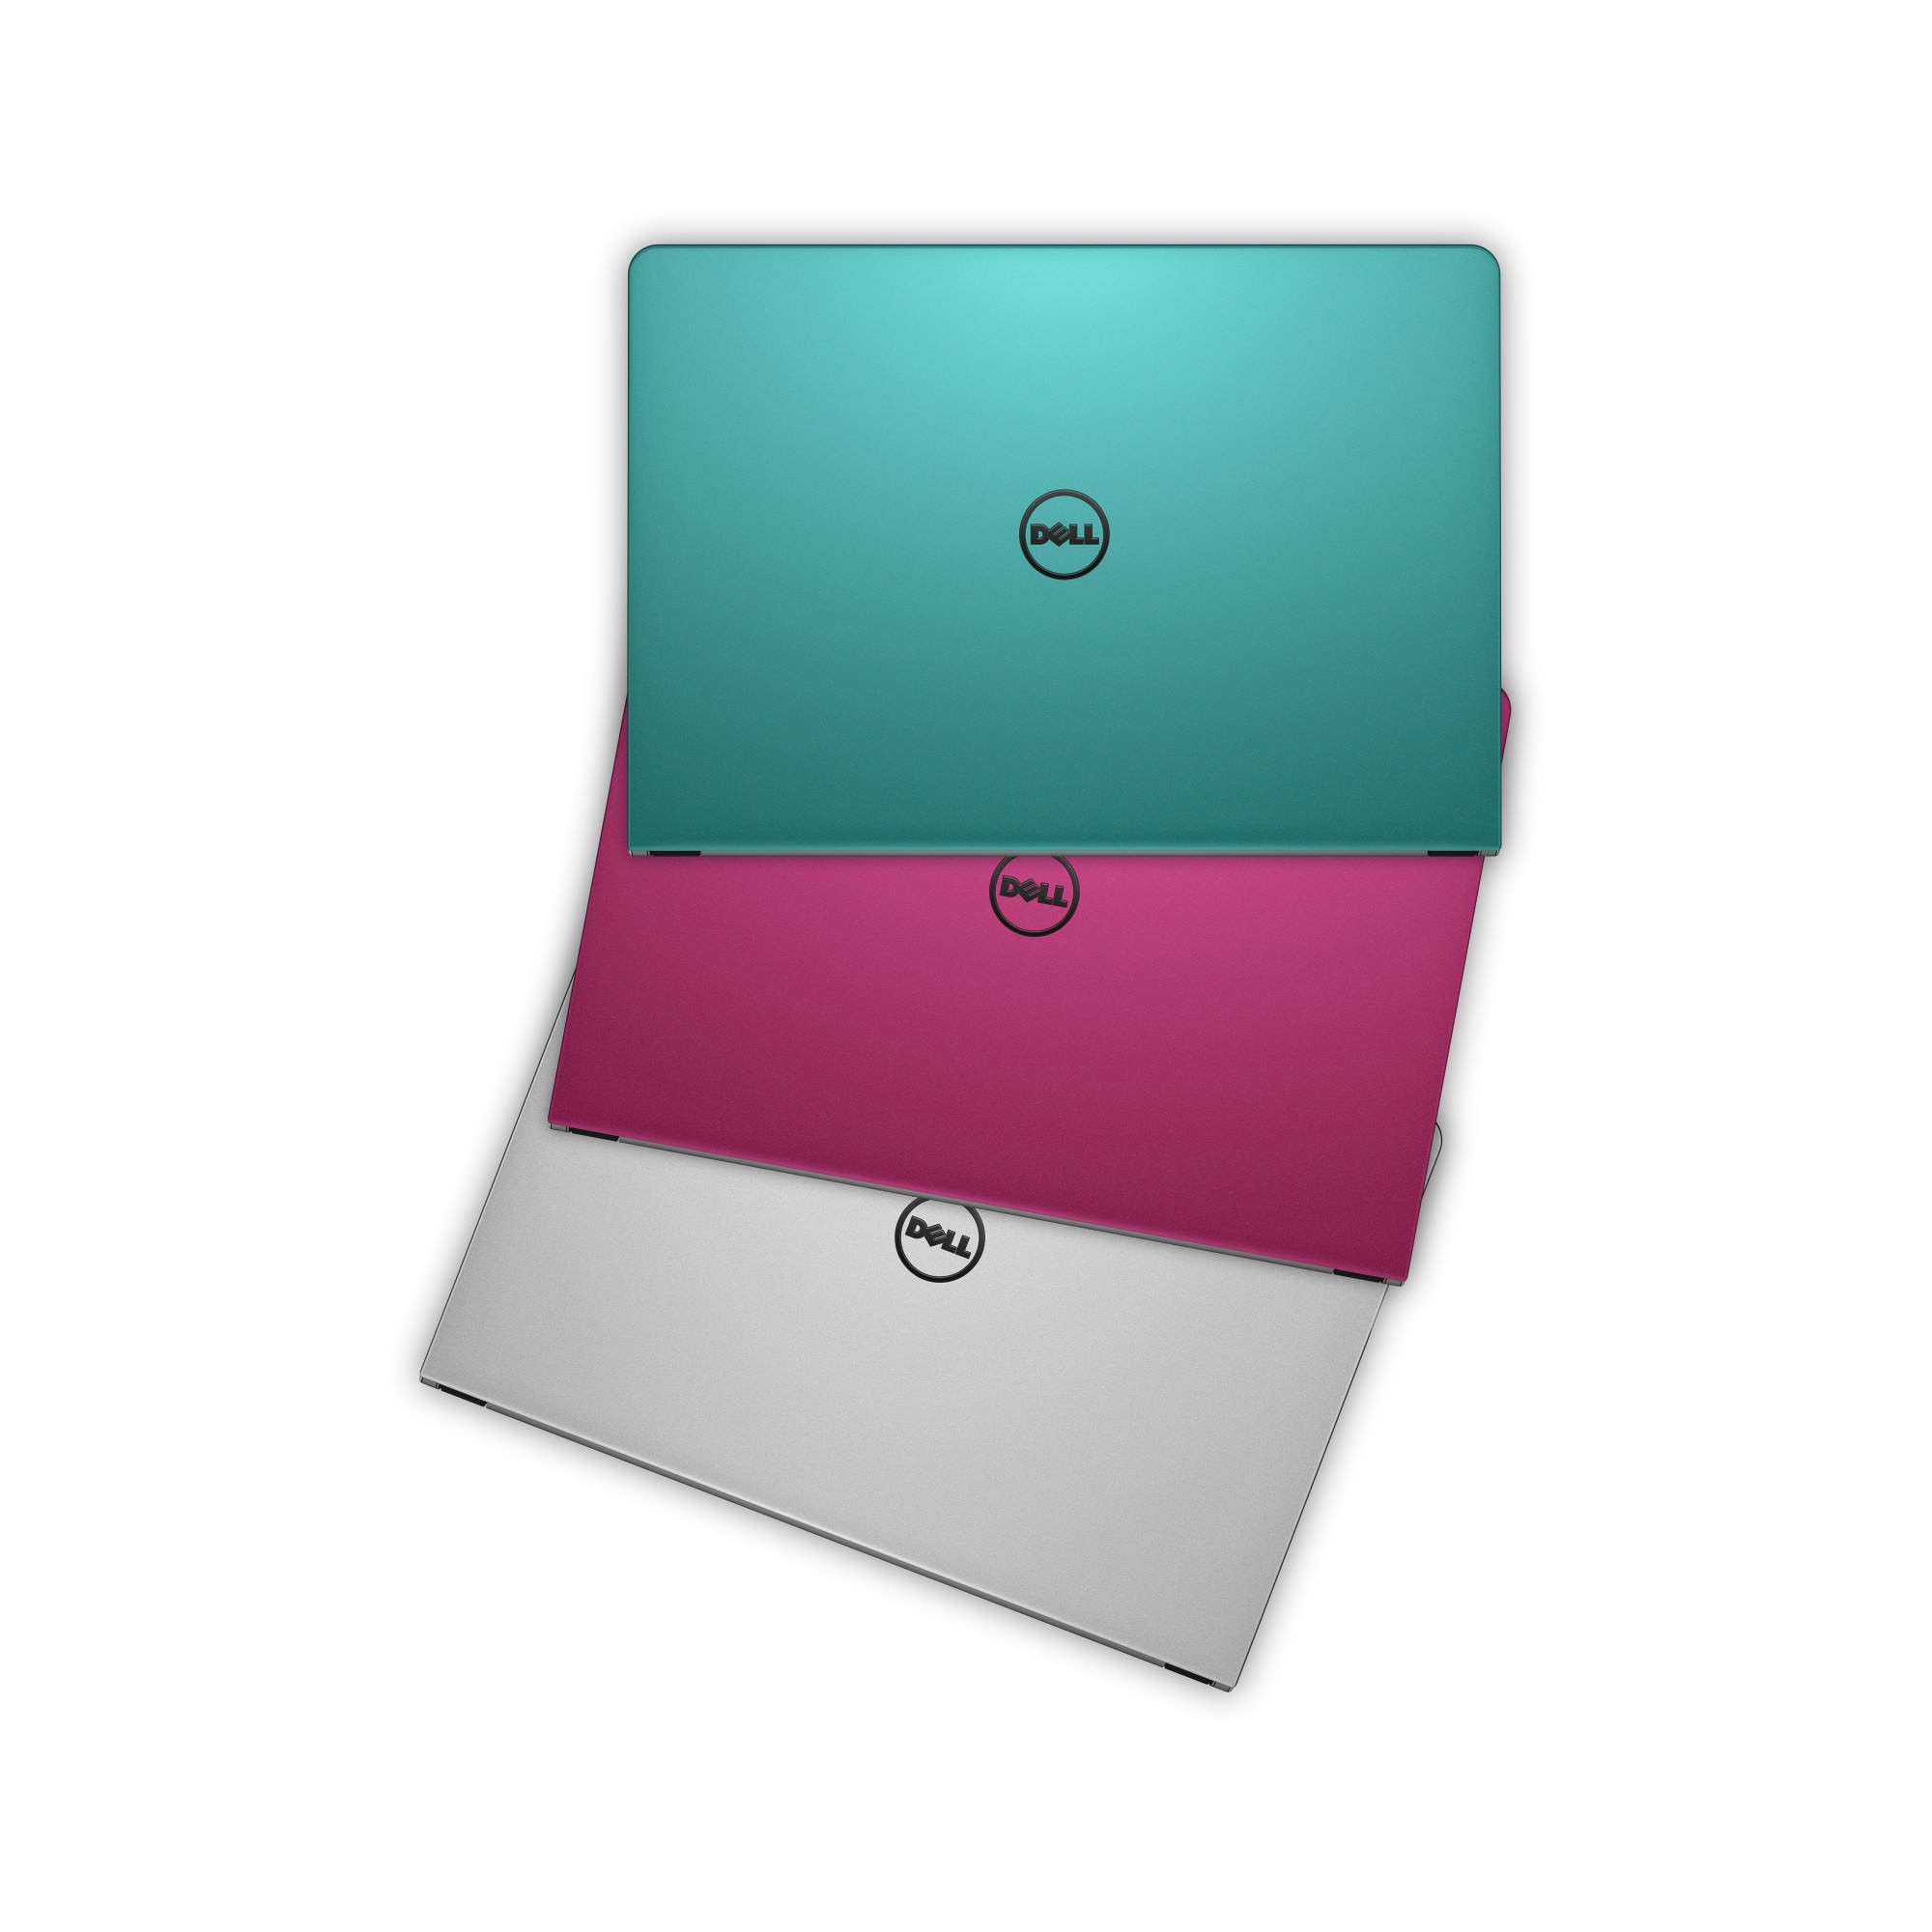 Dell Inspiron 14 5000 Series (Model 5455) Non-Touch 14-inch notebook computer, codename Tulip 14, with AMD processor available in three colors pinkberry, lagoon, and silver.